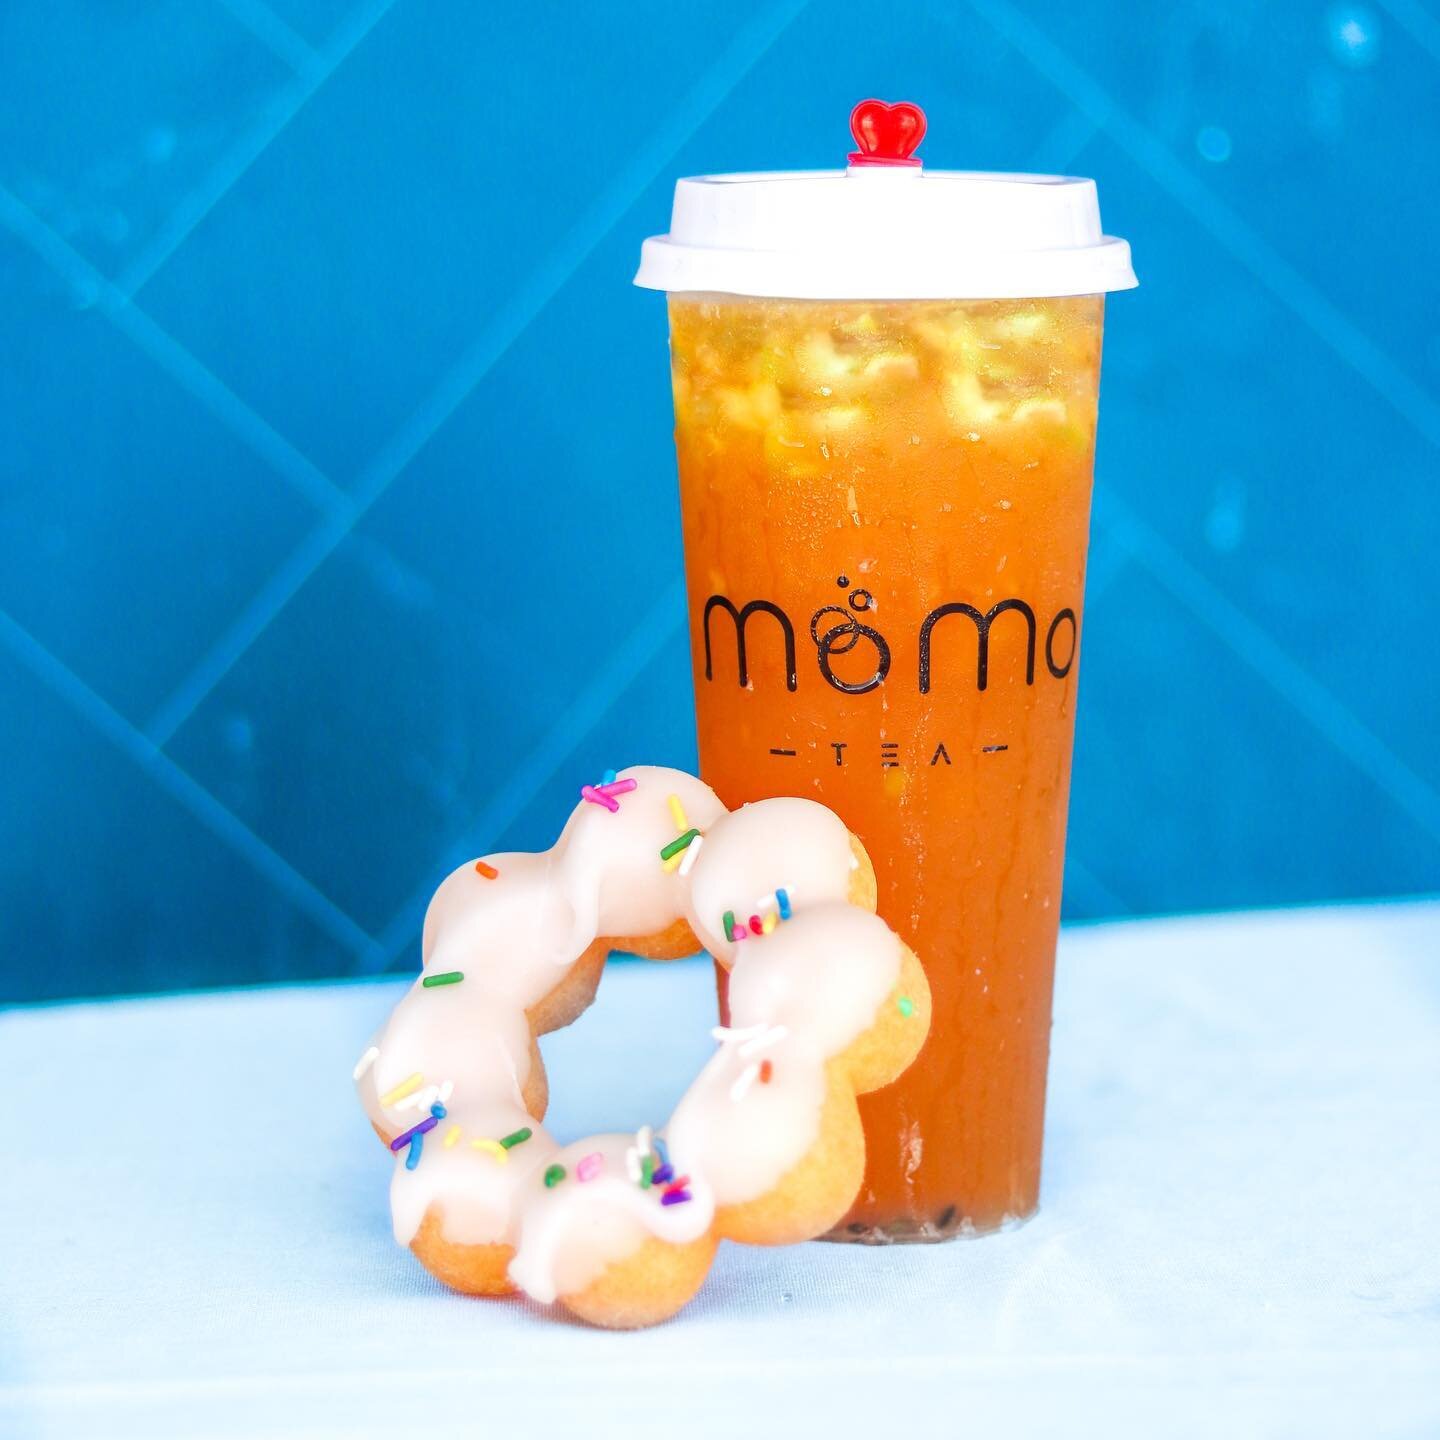 Friday mood 😍 Order a refreshing fruit tea with a 6-pack or 12-pack of mochi donuts! 

Open 11-7PM daily; we are closed on Tuesday&rsquo;s.
&bull;
&bull;
&bull;
&bull;
#momotea #momoteabr #batonrougefoodies #mochinutbr #batonrougetea #limetea #limep